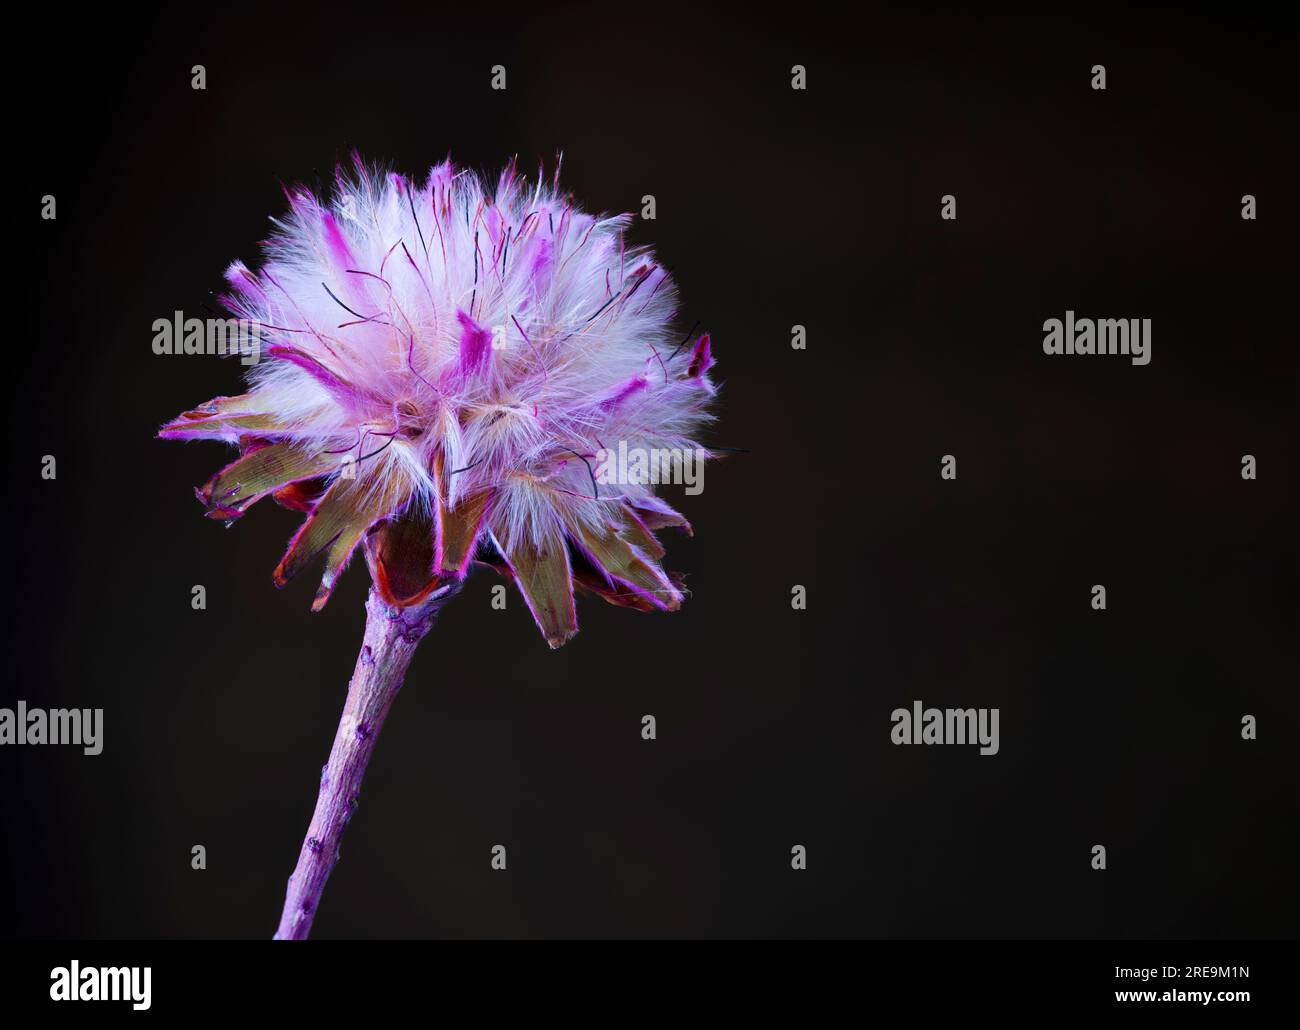 The unusual flowerhead of an Australian plant, the Hairy Mulla Mulla, (Ptilotus helipteroides), photographed against a plain dark background Stock Photo